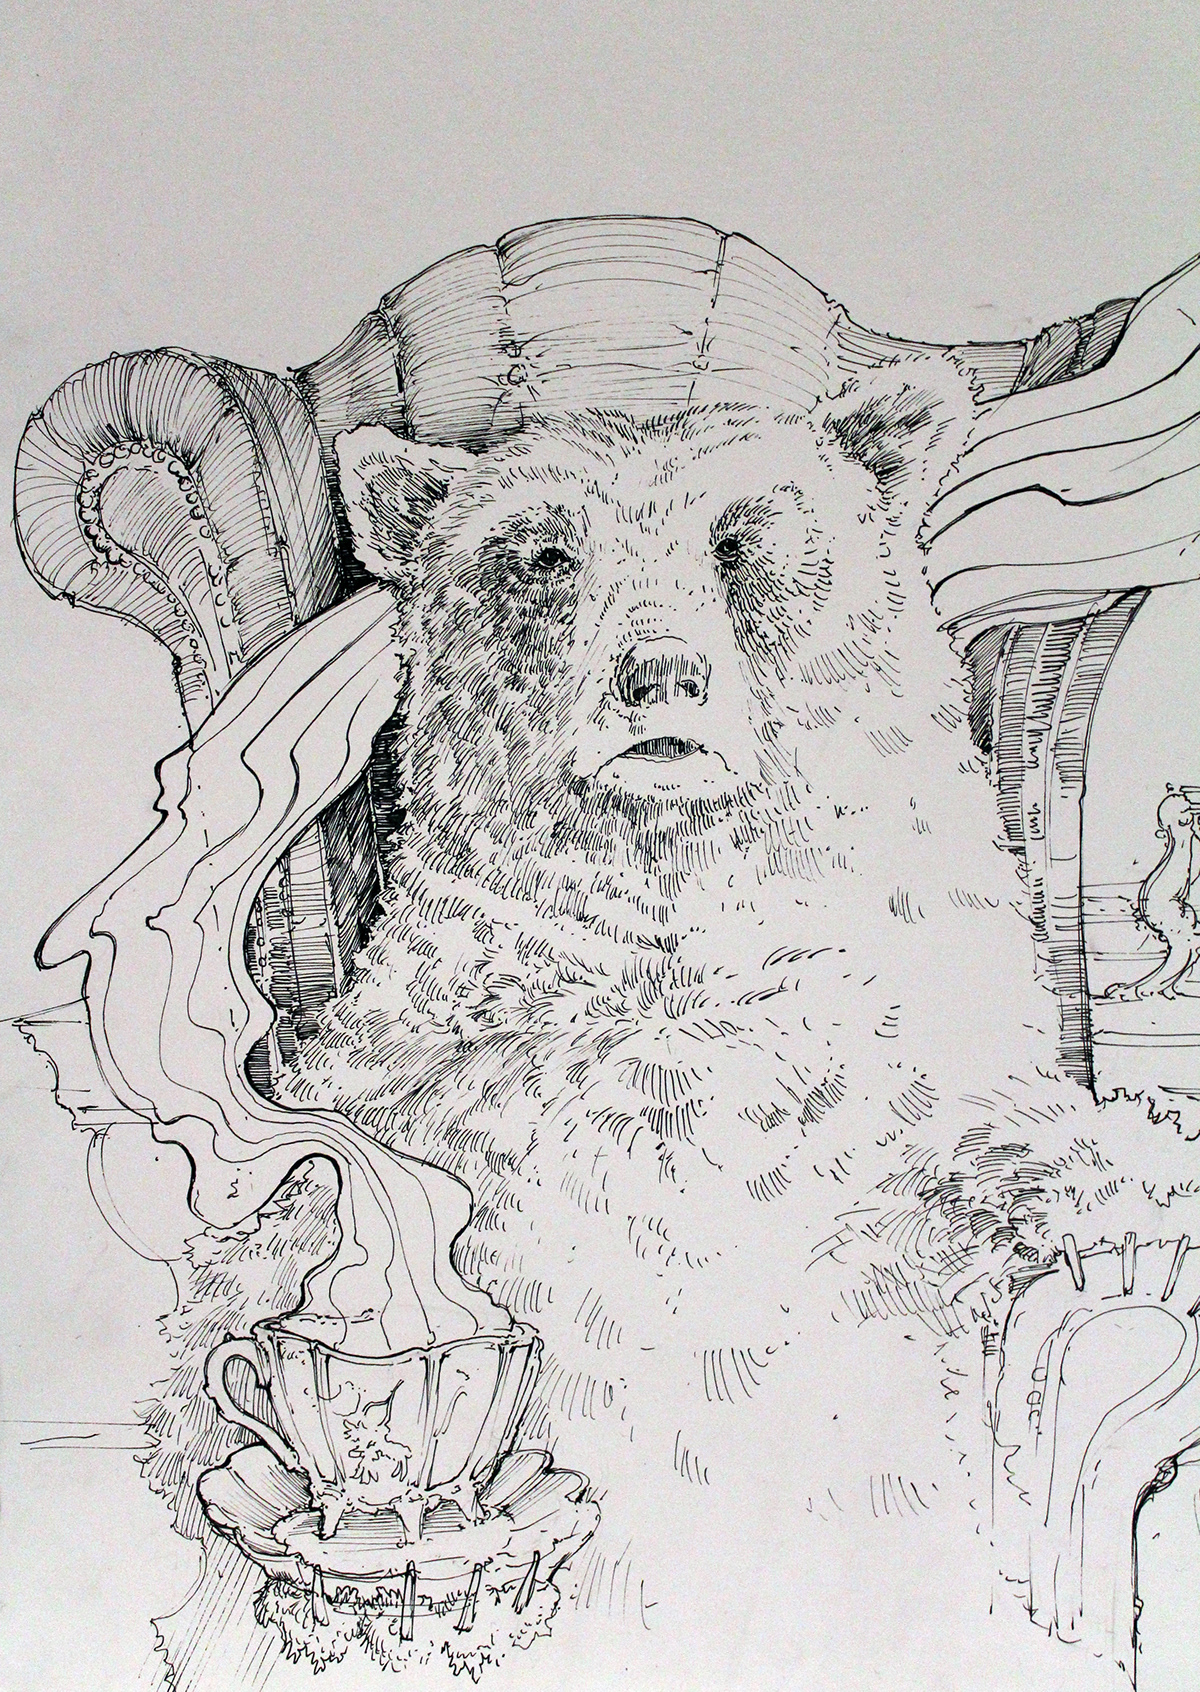 bear  grizzly  fairytale  story   vintage  smoke  Illustration  Graphic  pen nightmare dream  coffee  shadow secession milord